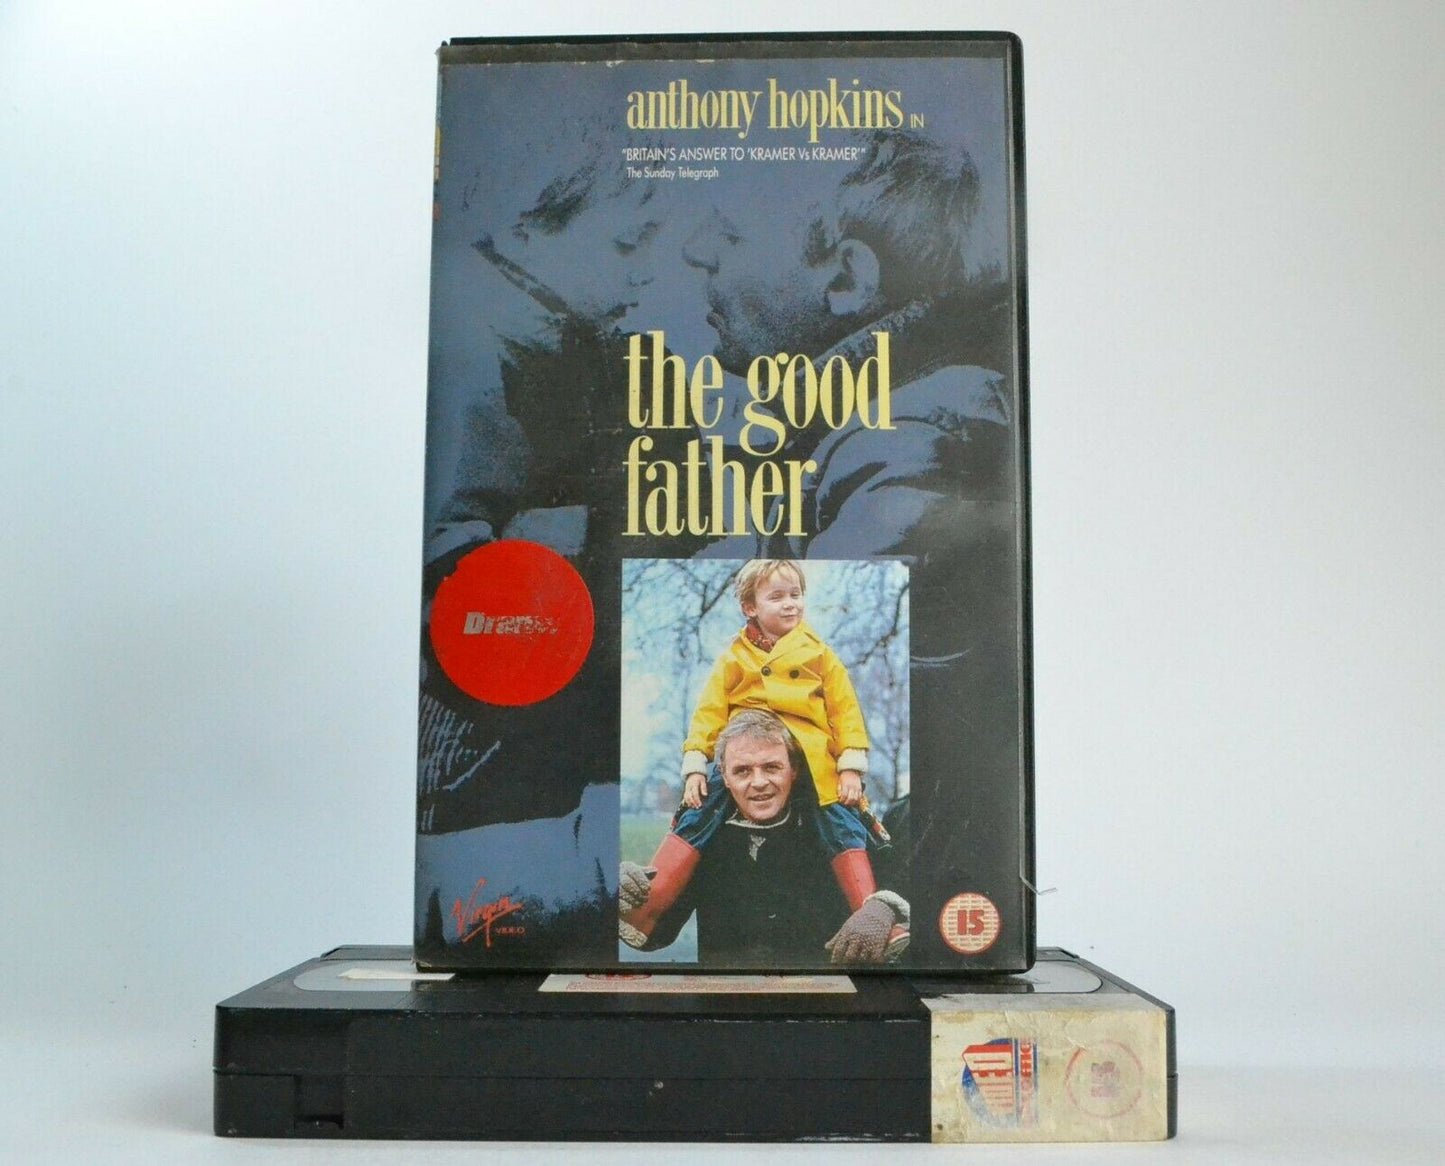 The Good Father: (1986) Virgin - [Peter Prince] - Drama - Anthony Hopkins - VHS-